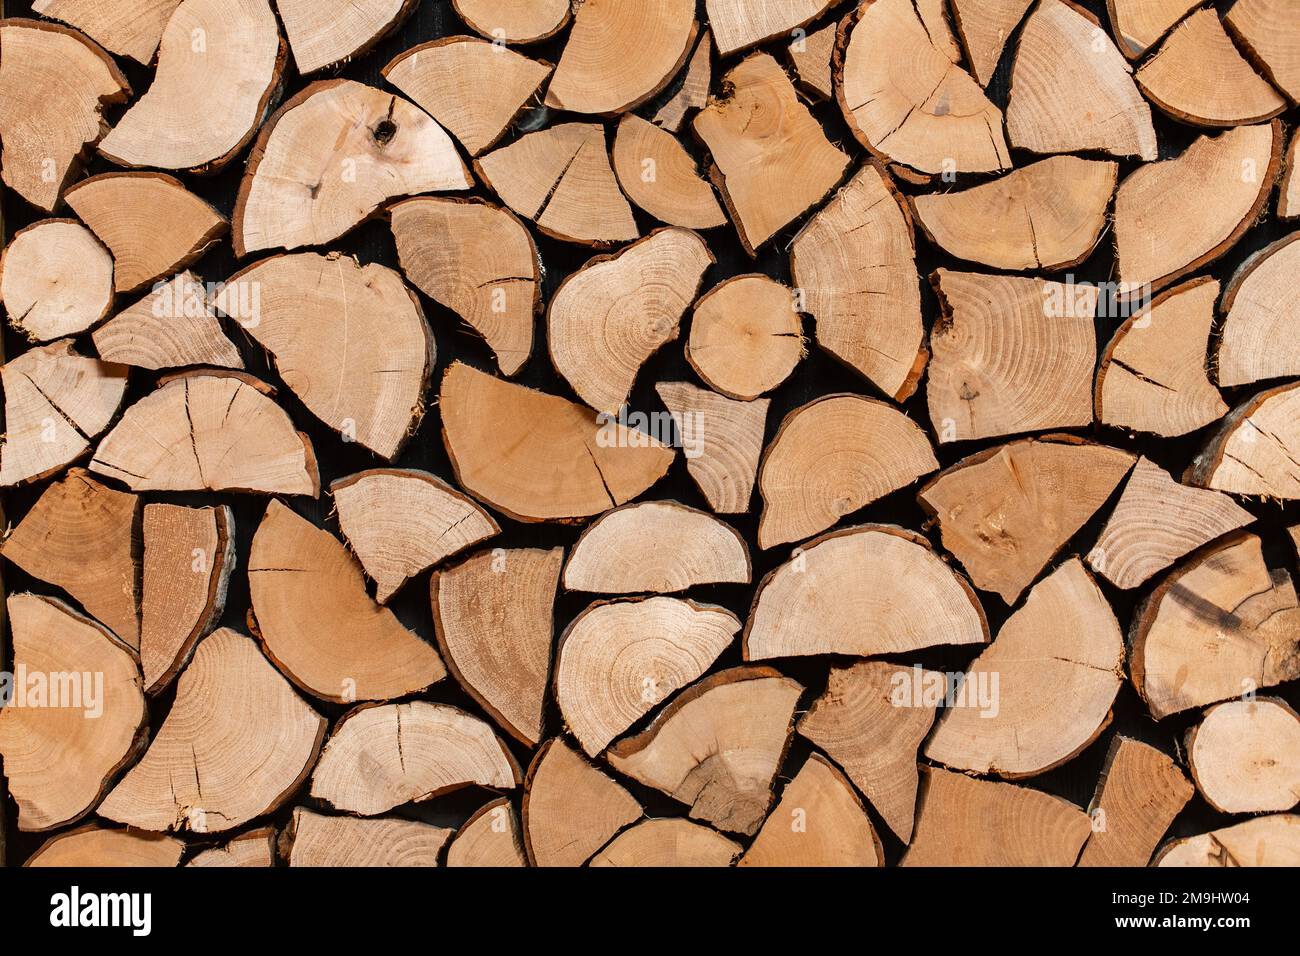 background of stacked firewood Stock Photo